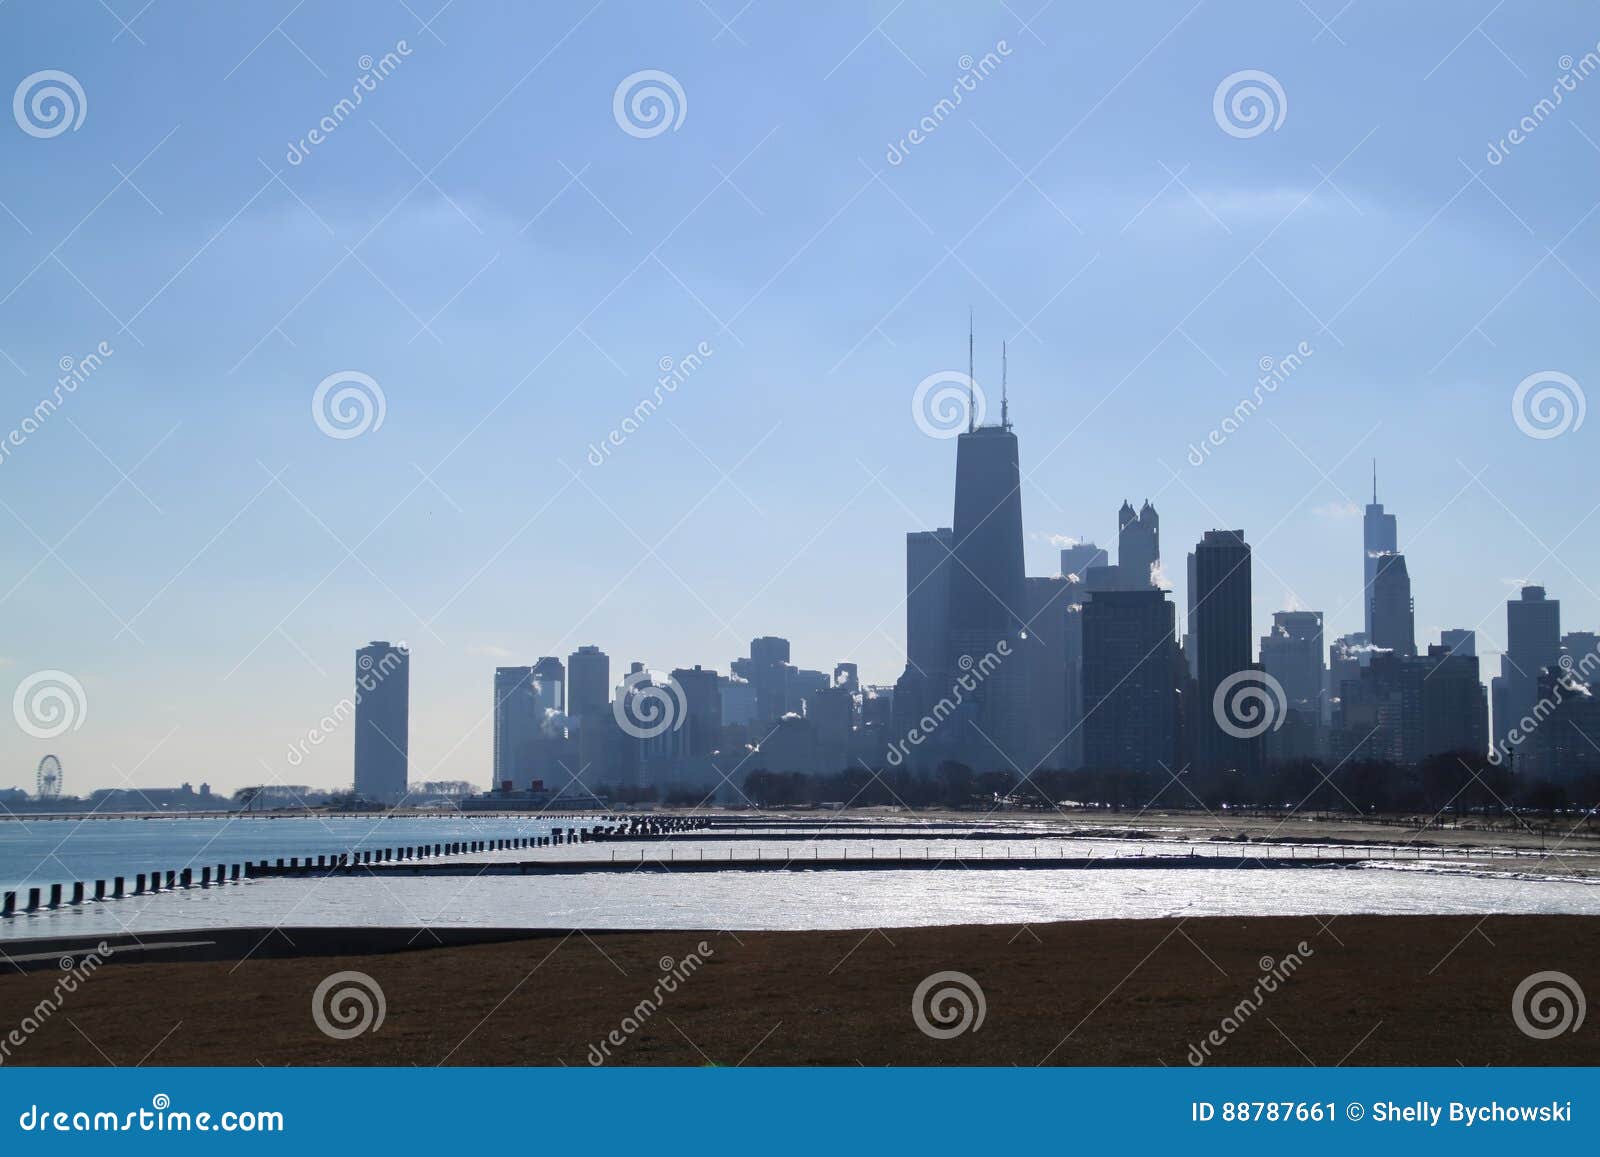 Sunny Day Over Chicago Skyline And A Frozen Lake Michigan Stock Image